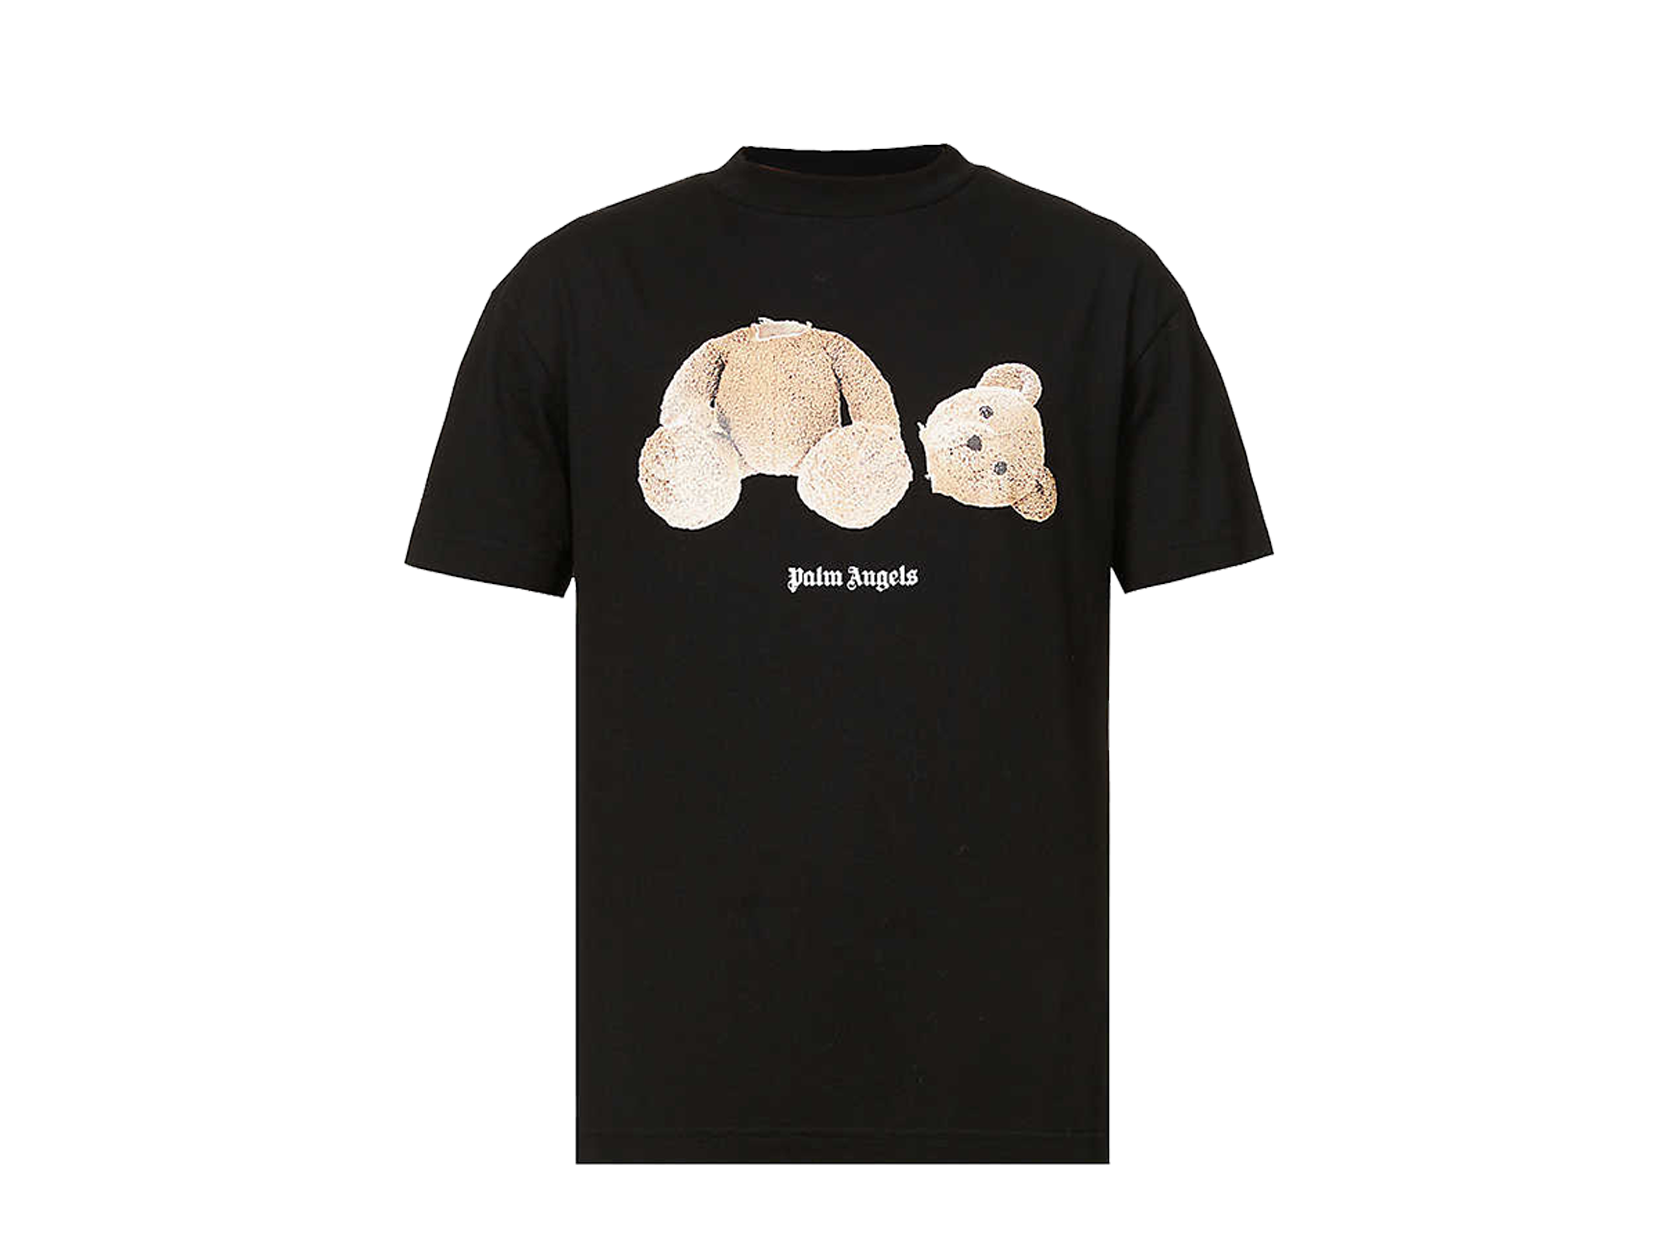 Double Boxed hoodie 244.99 Palm Angels Teddy Kill The Bear Black T Shirt Double Boxed